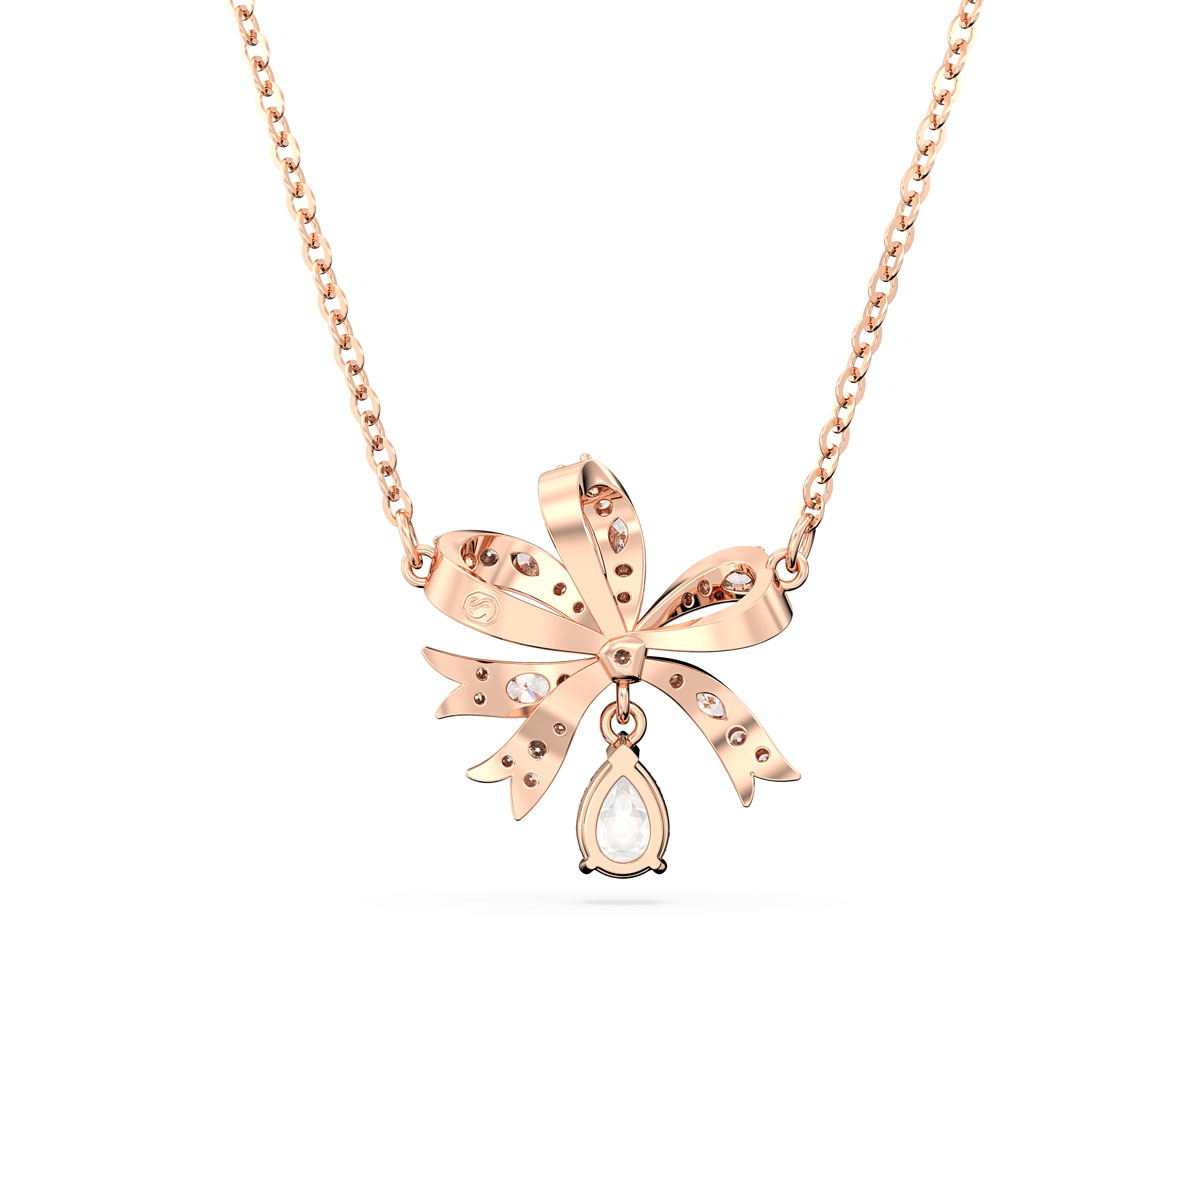 Swarovski Jewelry and Rose Gold Volta Bow Pendant Necklace